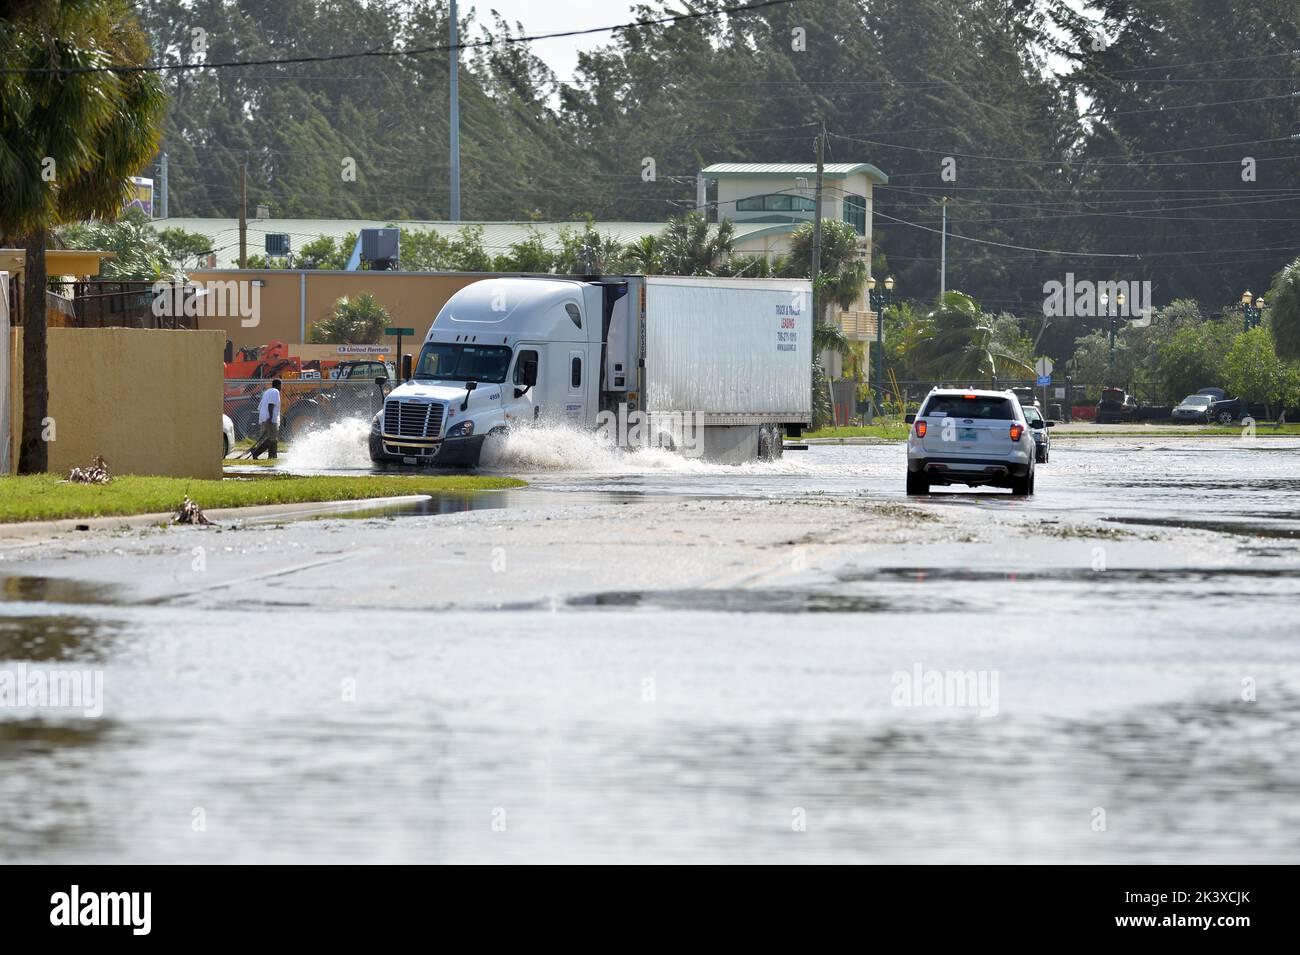 FORT LAUDERDALE, FL - SEPTEMBER 22, 2022: Hurricane Ian makes landfall in Florida as dangerous Category 4 hurricane. Historic File photos of Hurricanes in South Florida  People:  Hurricane Destruction Stock Photo